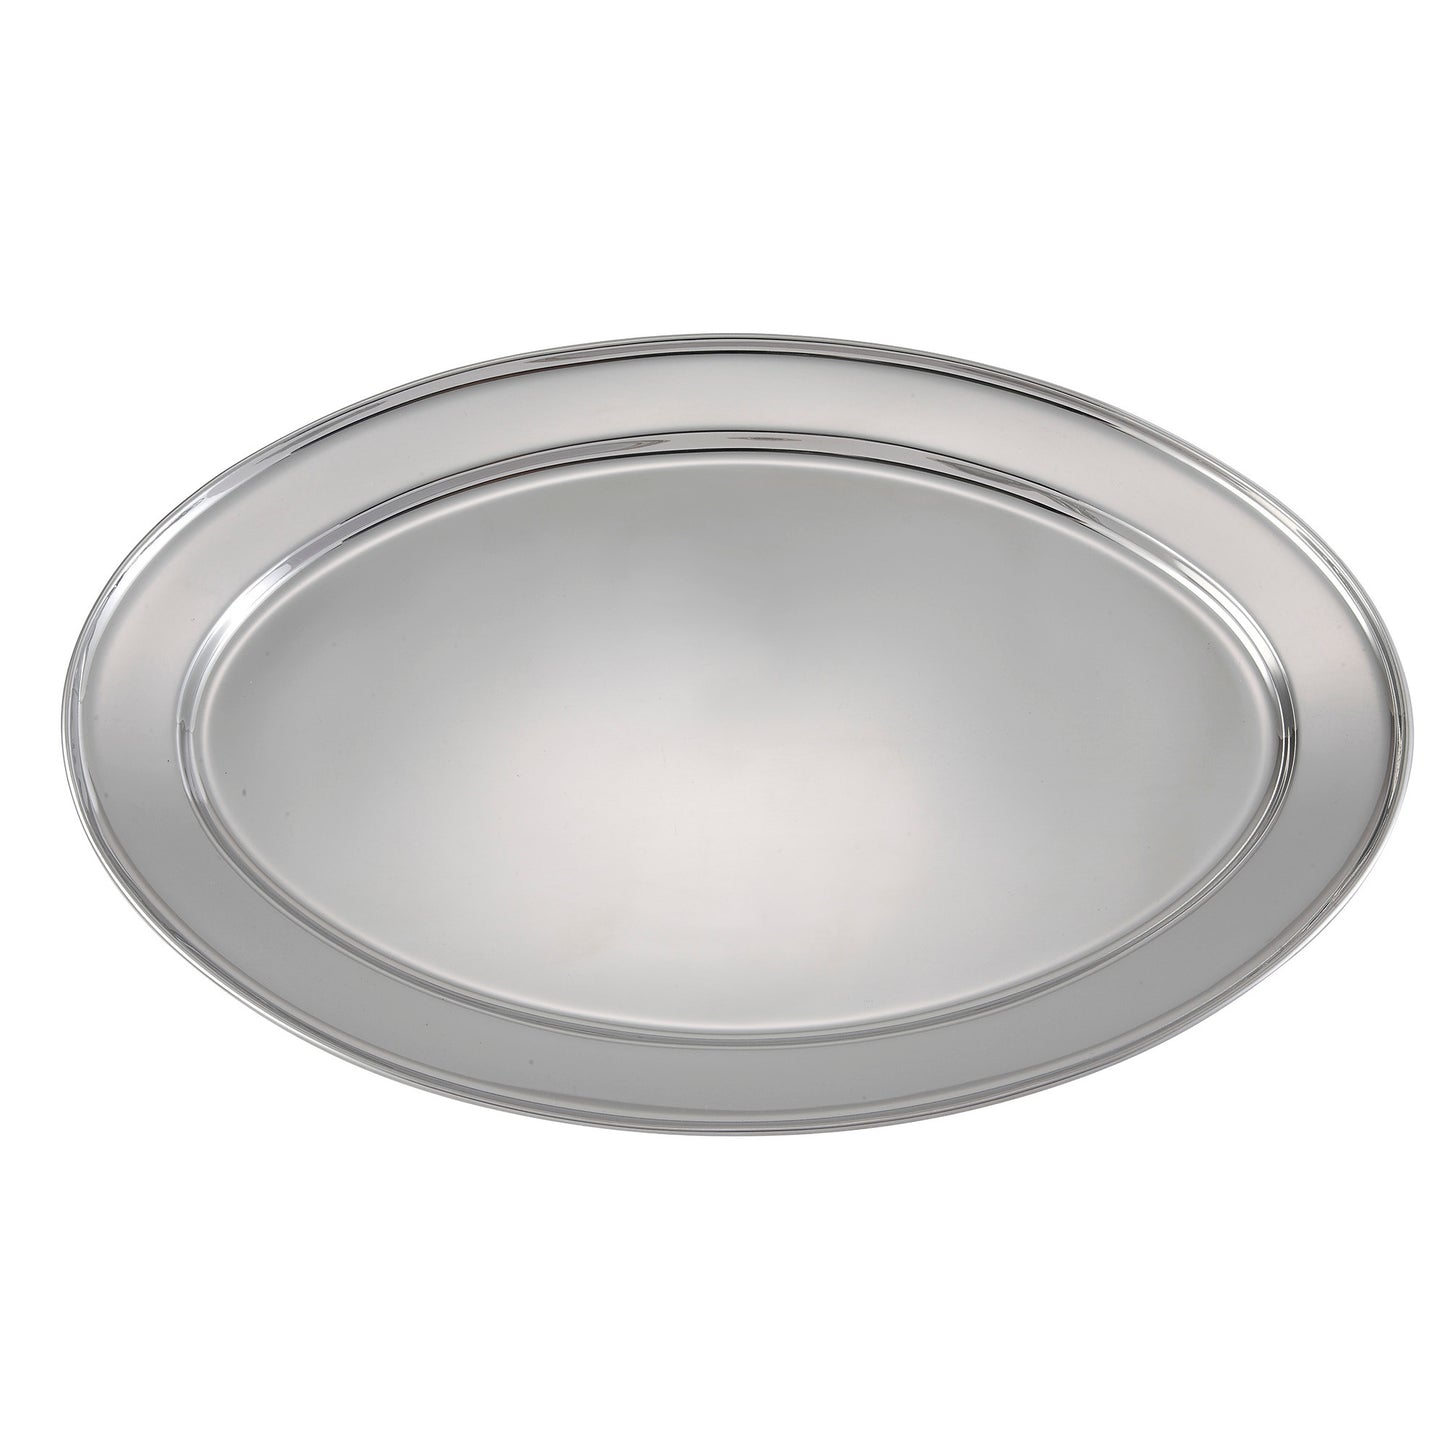 OPL-18 - Oval Platter, Stainless Steel - 18"